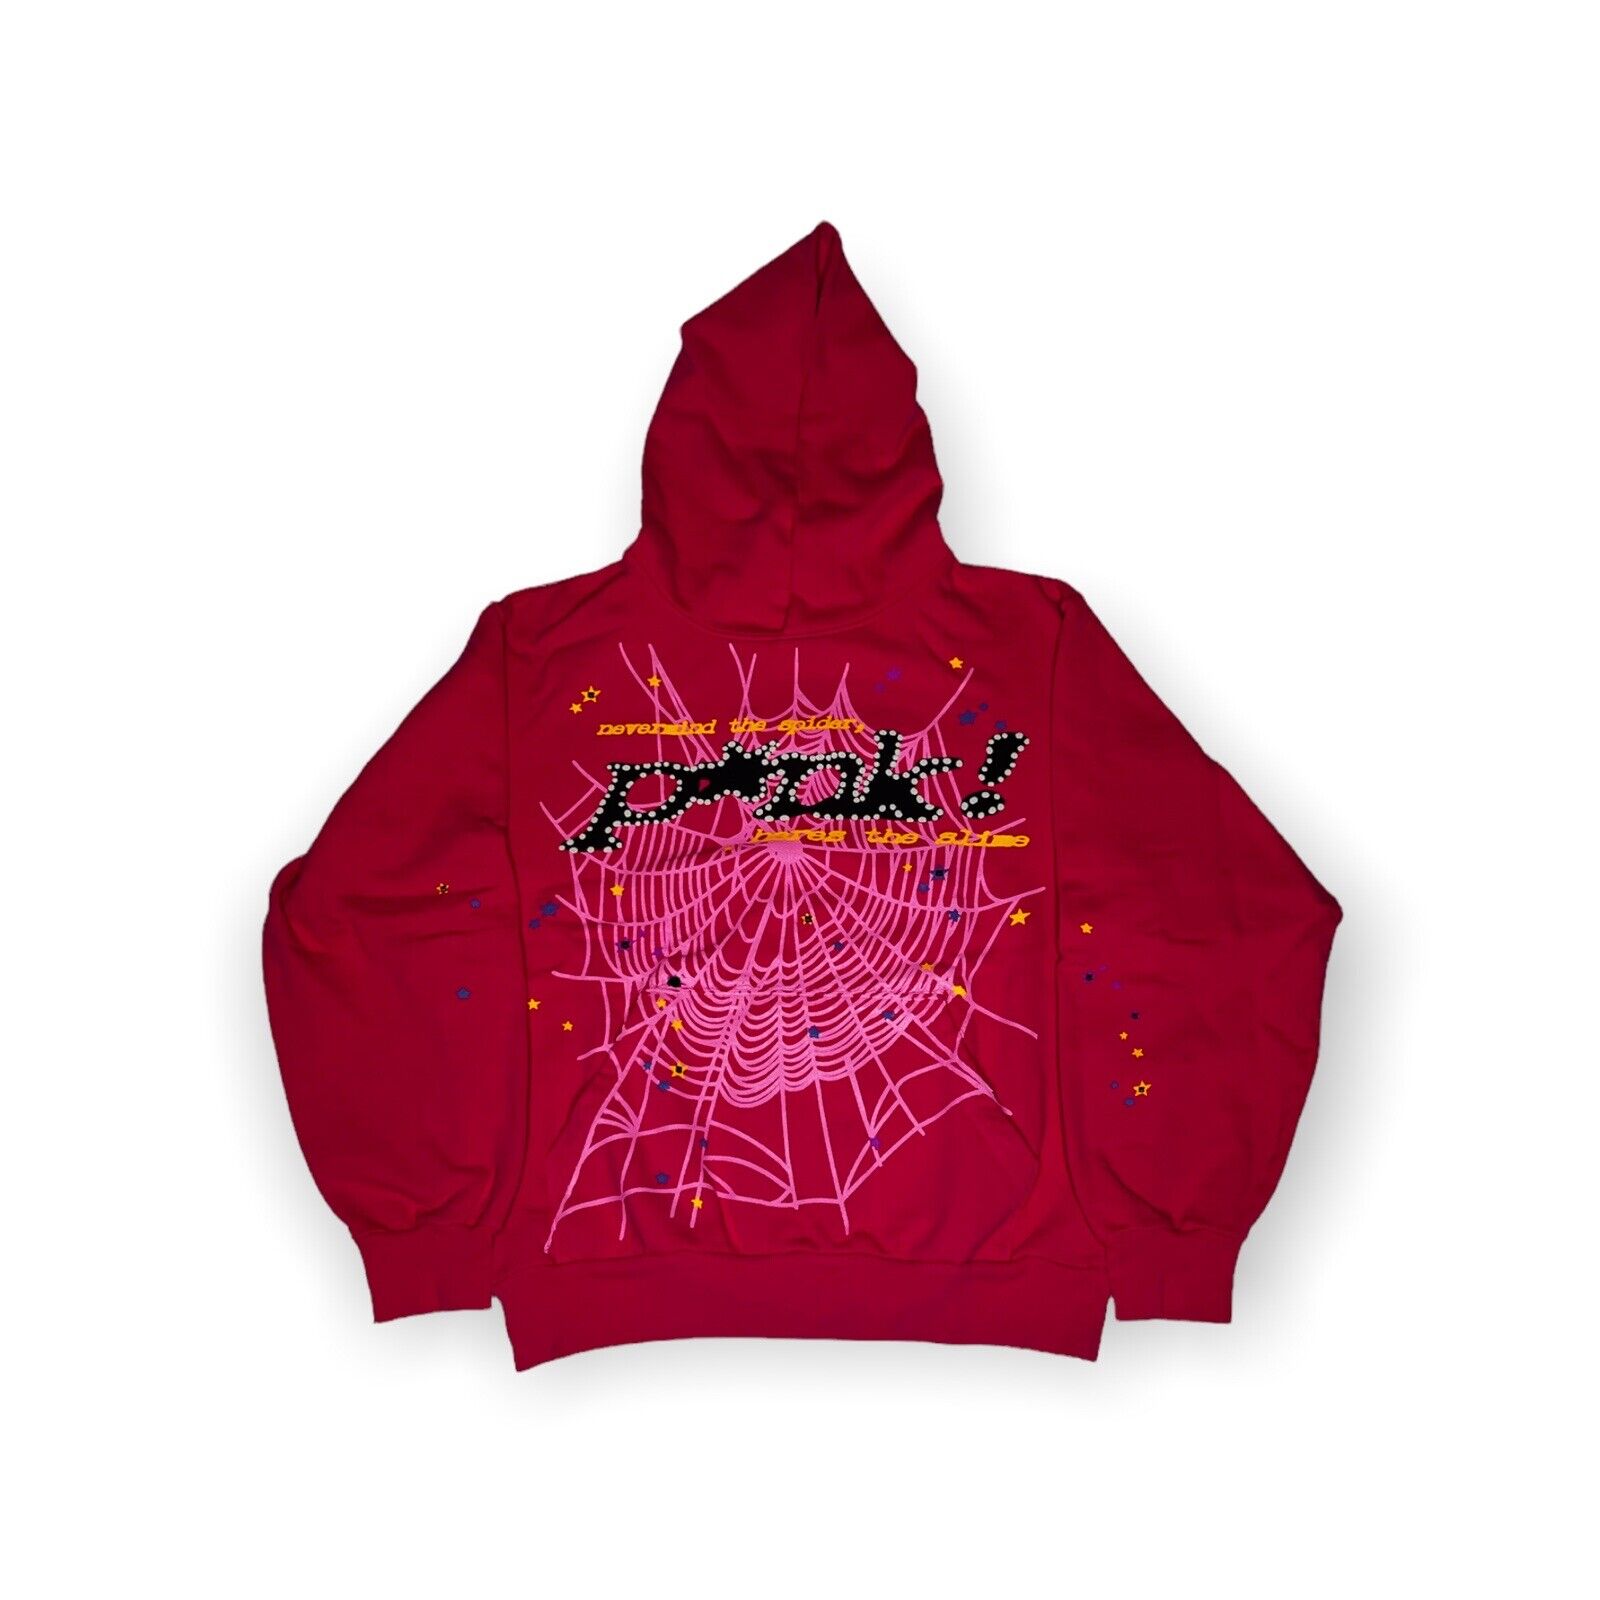 NEW Spider Worldwide × Young Thug Sp5der Pink Hoodie 100% AUTHENTIC Size XL